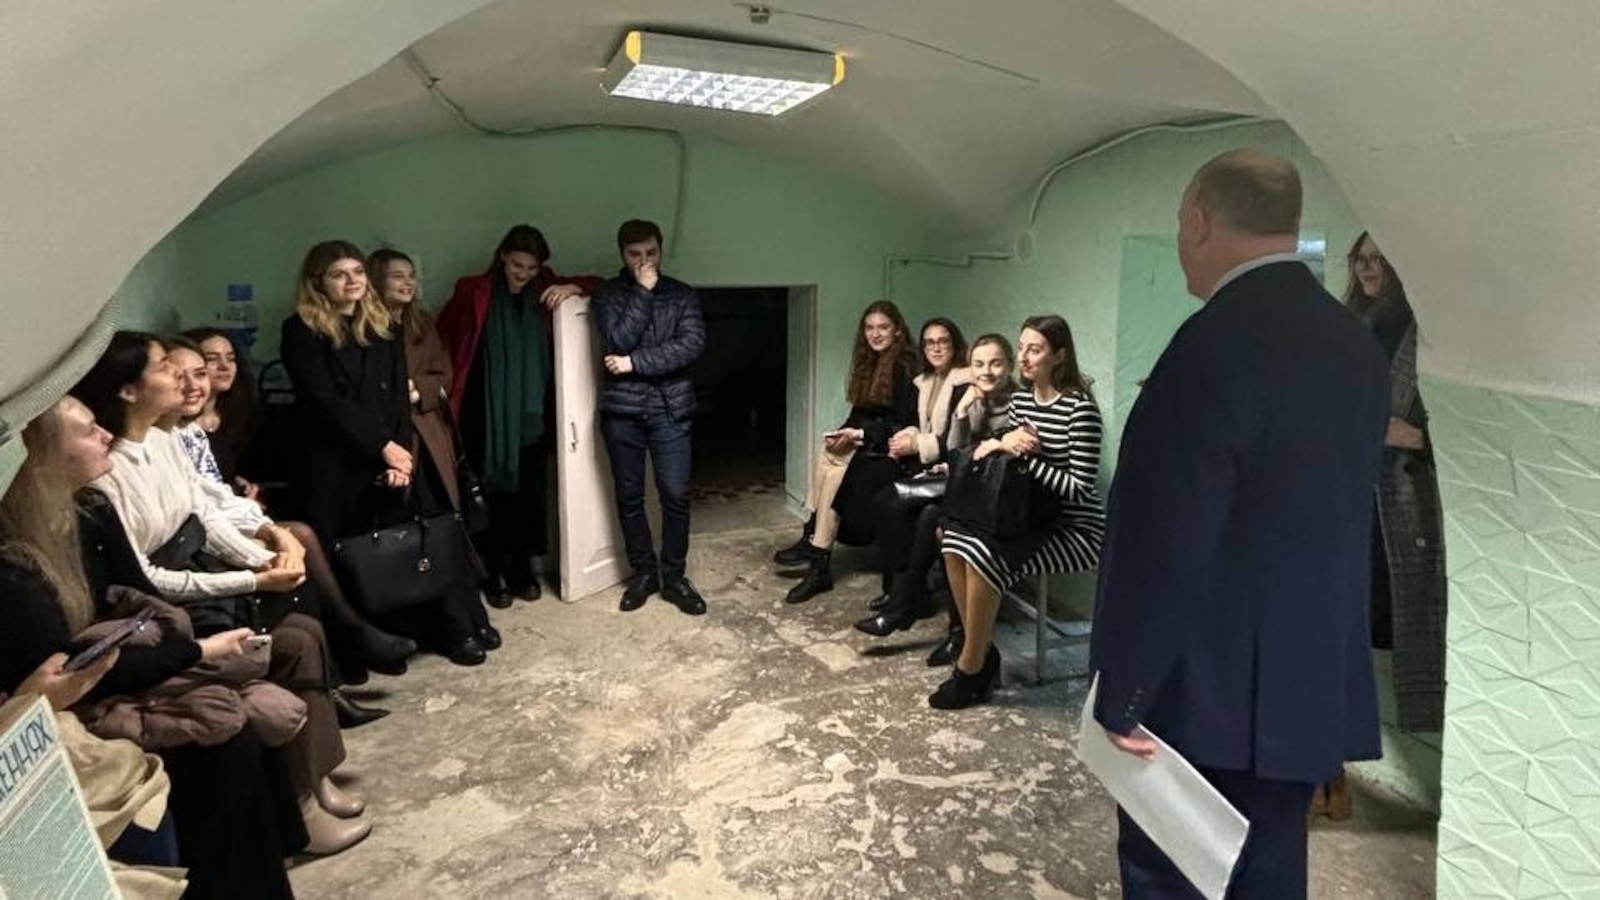 In a bomb shelter under Kyiv, a US professor taught Ukrainian students about the art of peace [Video]